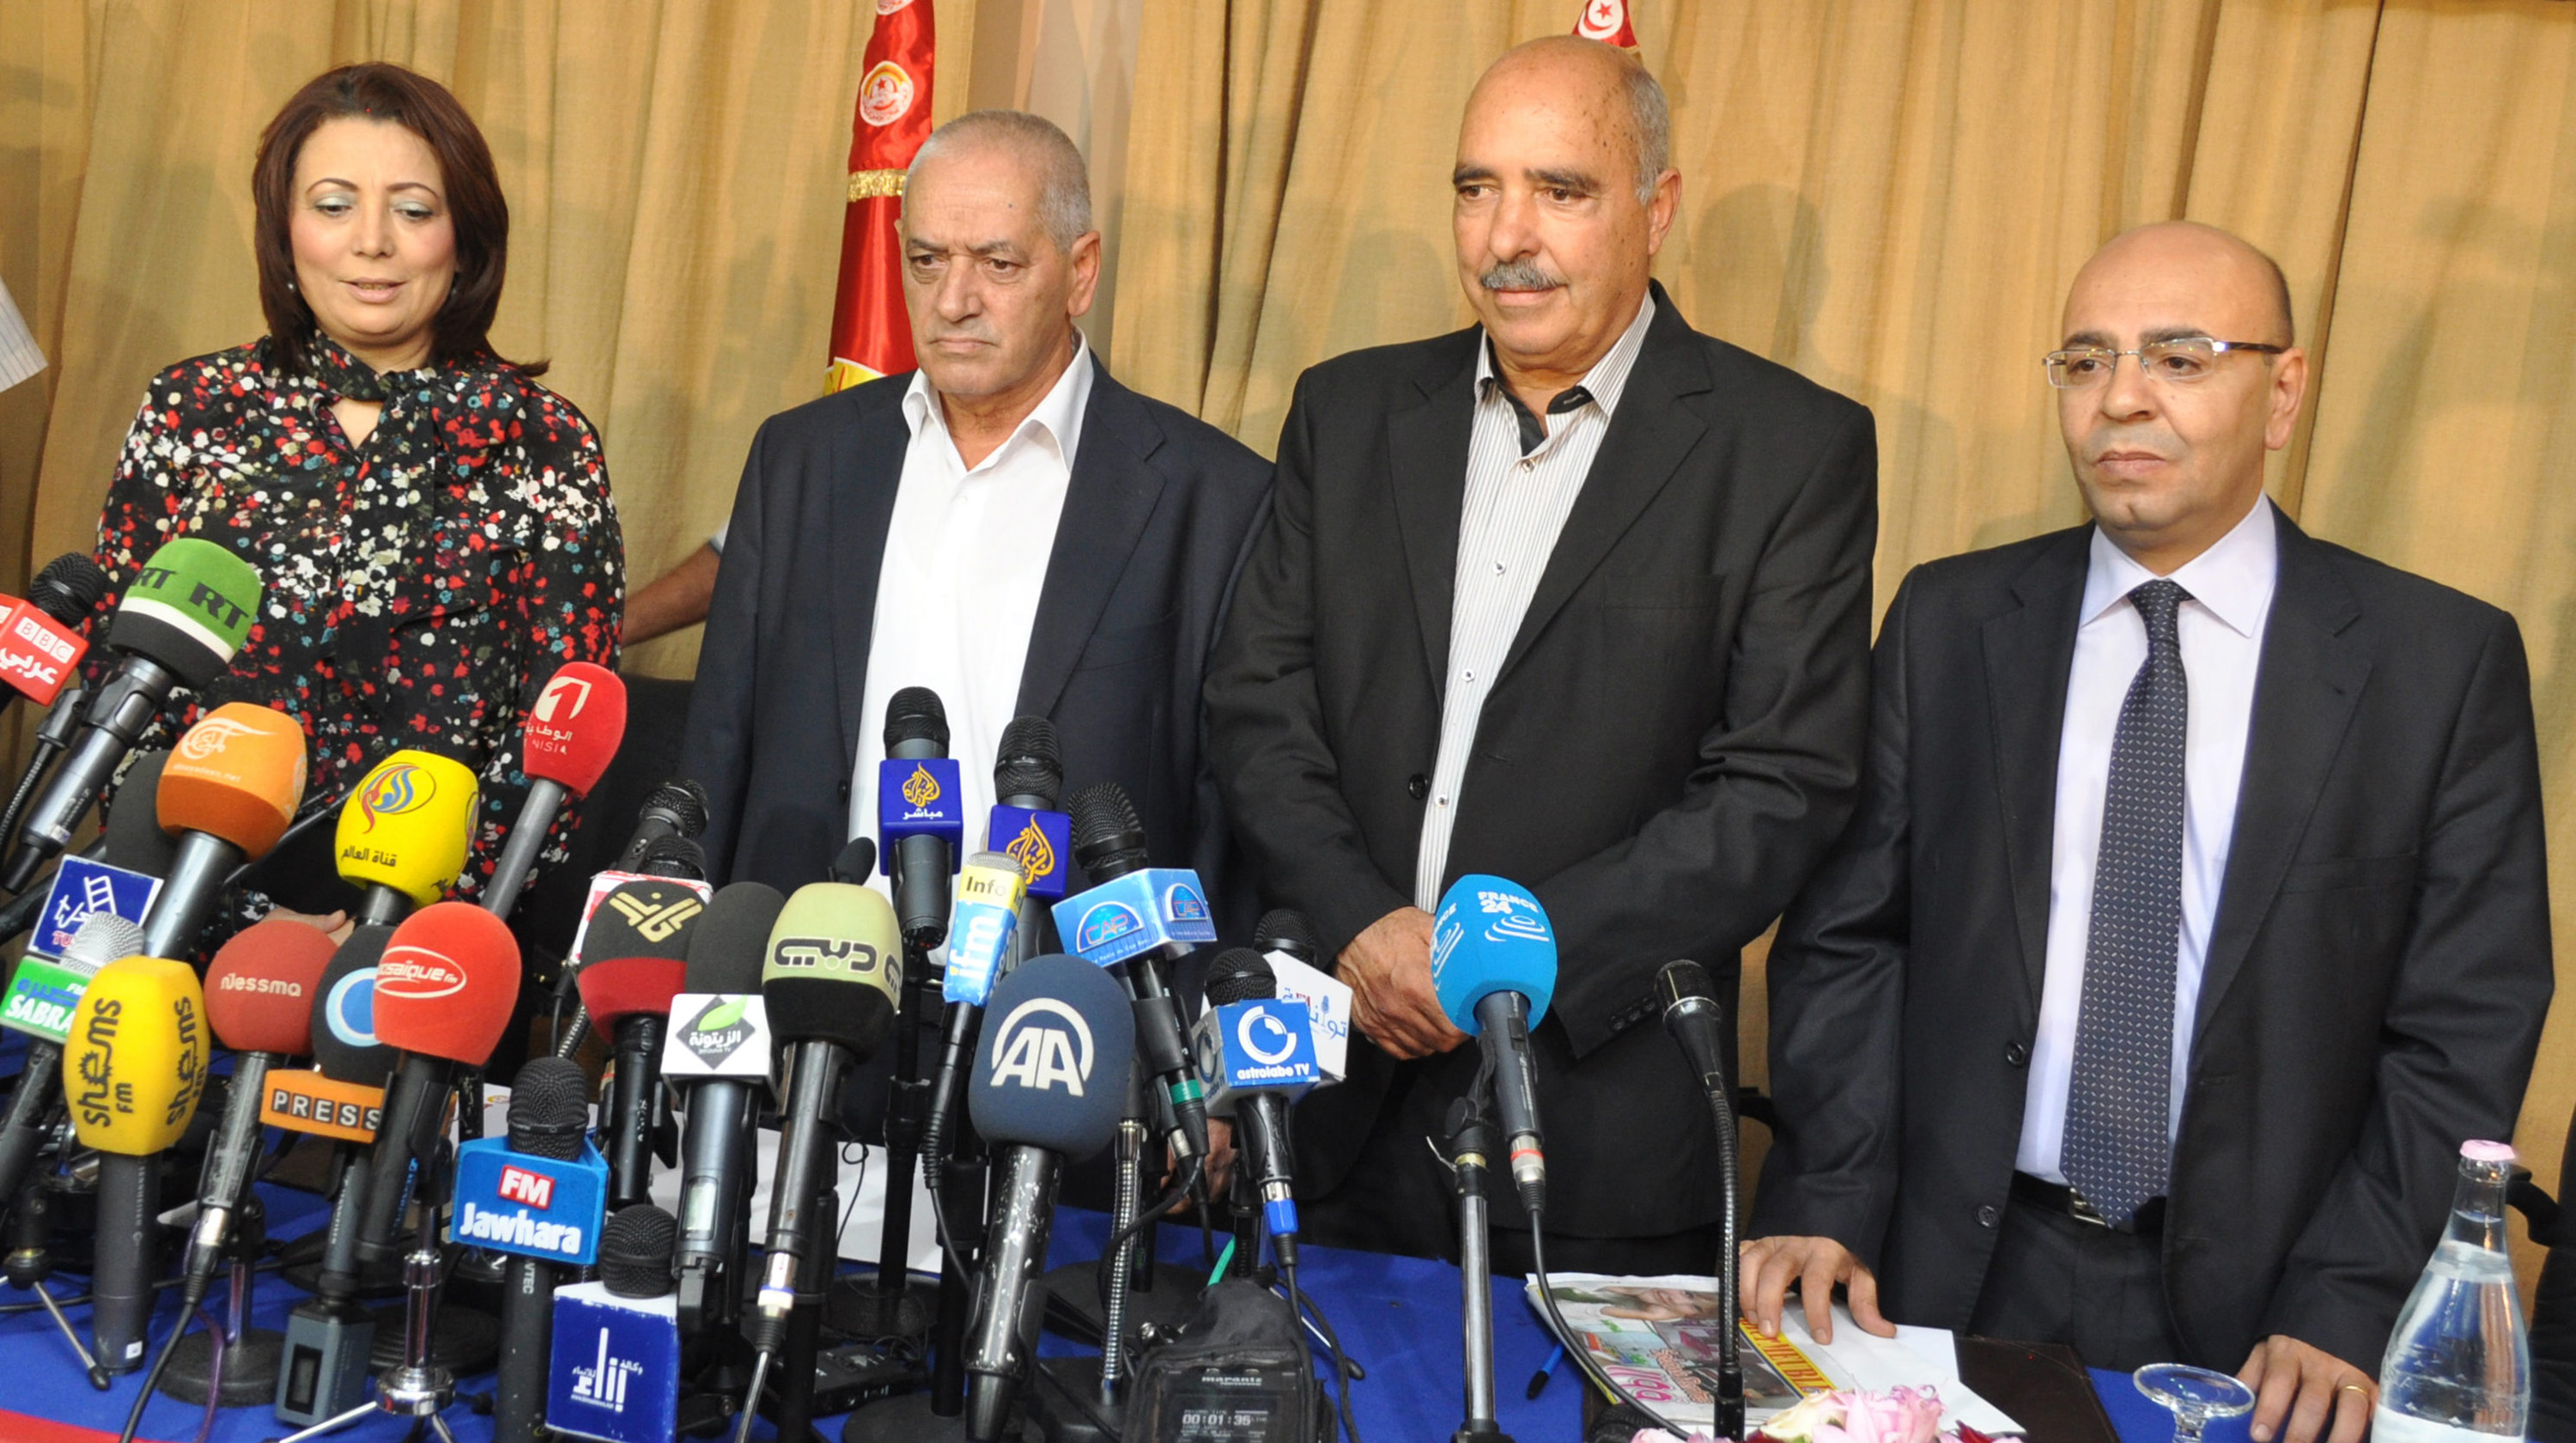 Representatives of the Tunisian National Dialogue Quartet attend a press conference on Nobel Peace Prize on Oct. 9, 2015 in Tunis, Tunisia. The Tunisian National Dialogue Quartet won the 2015 Nobel Peace Prize on Friday for "its decisive contribution to the building of a pluralistic democracy in Tunisia," the Norwegian Nobel Committee announced. (Adel Ezzine/Xinhua/Zuma Press/TNS)